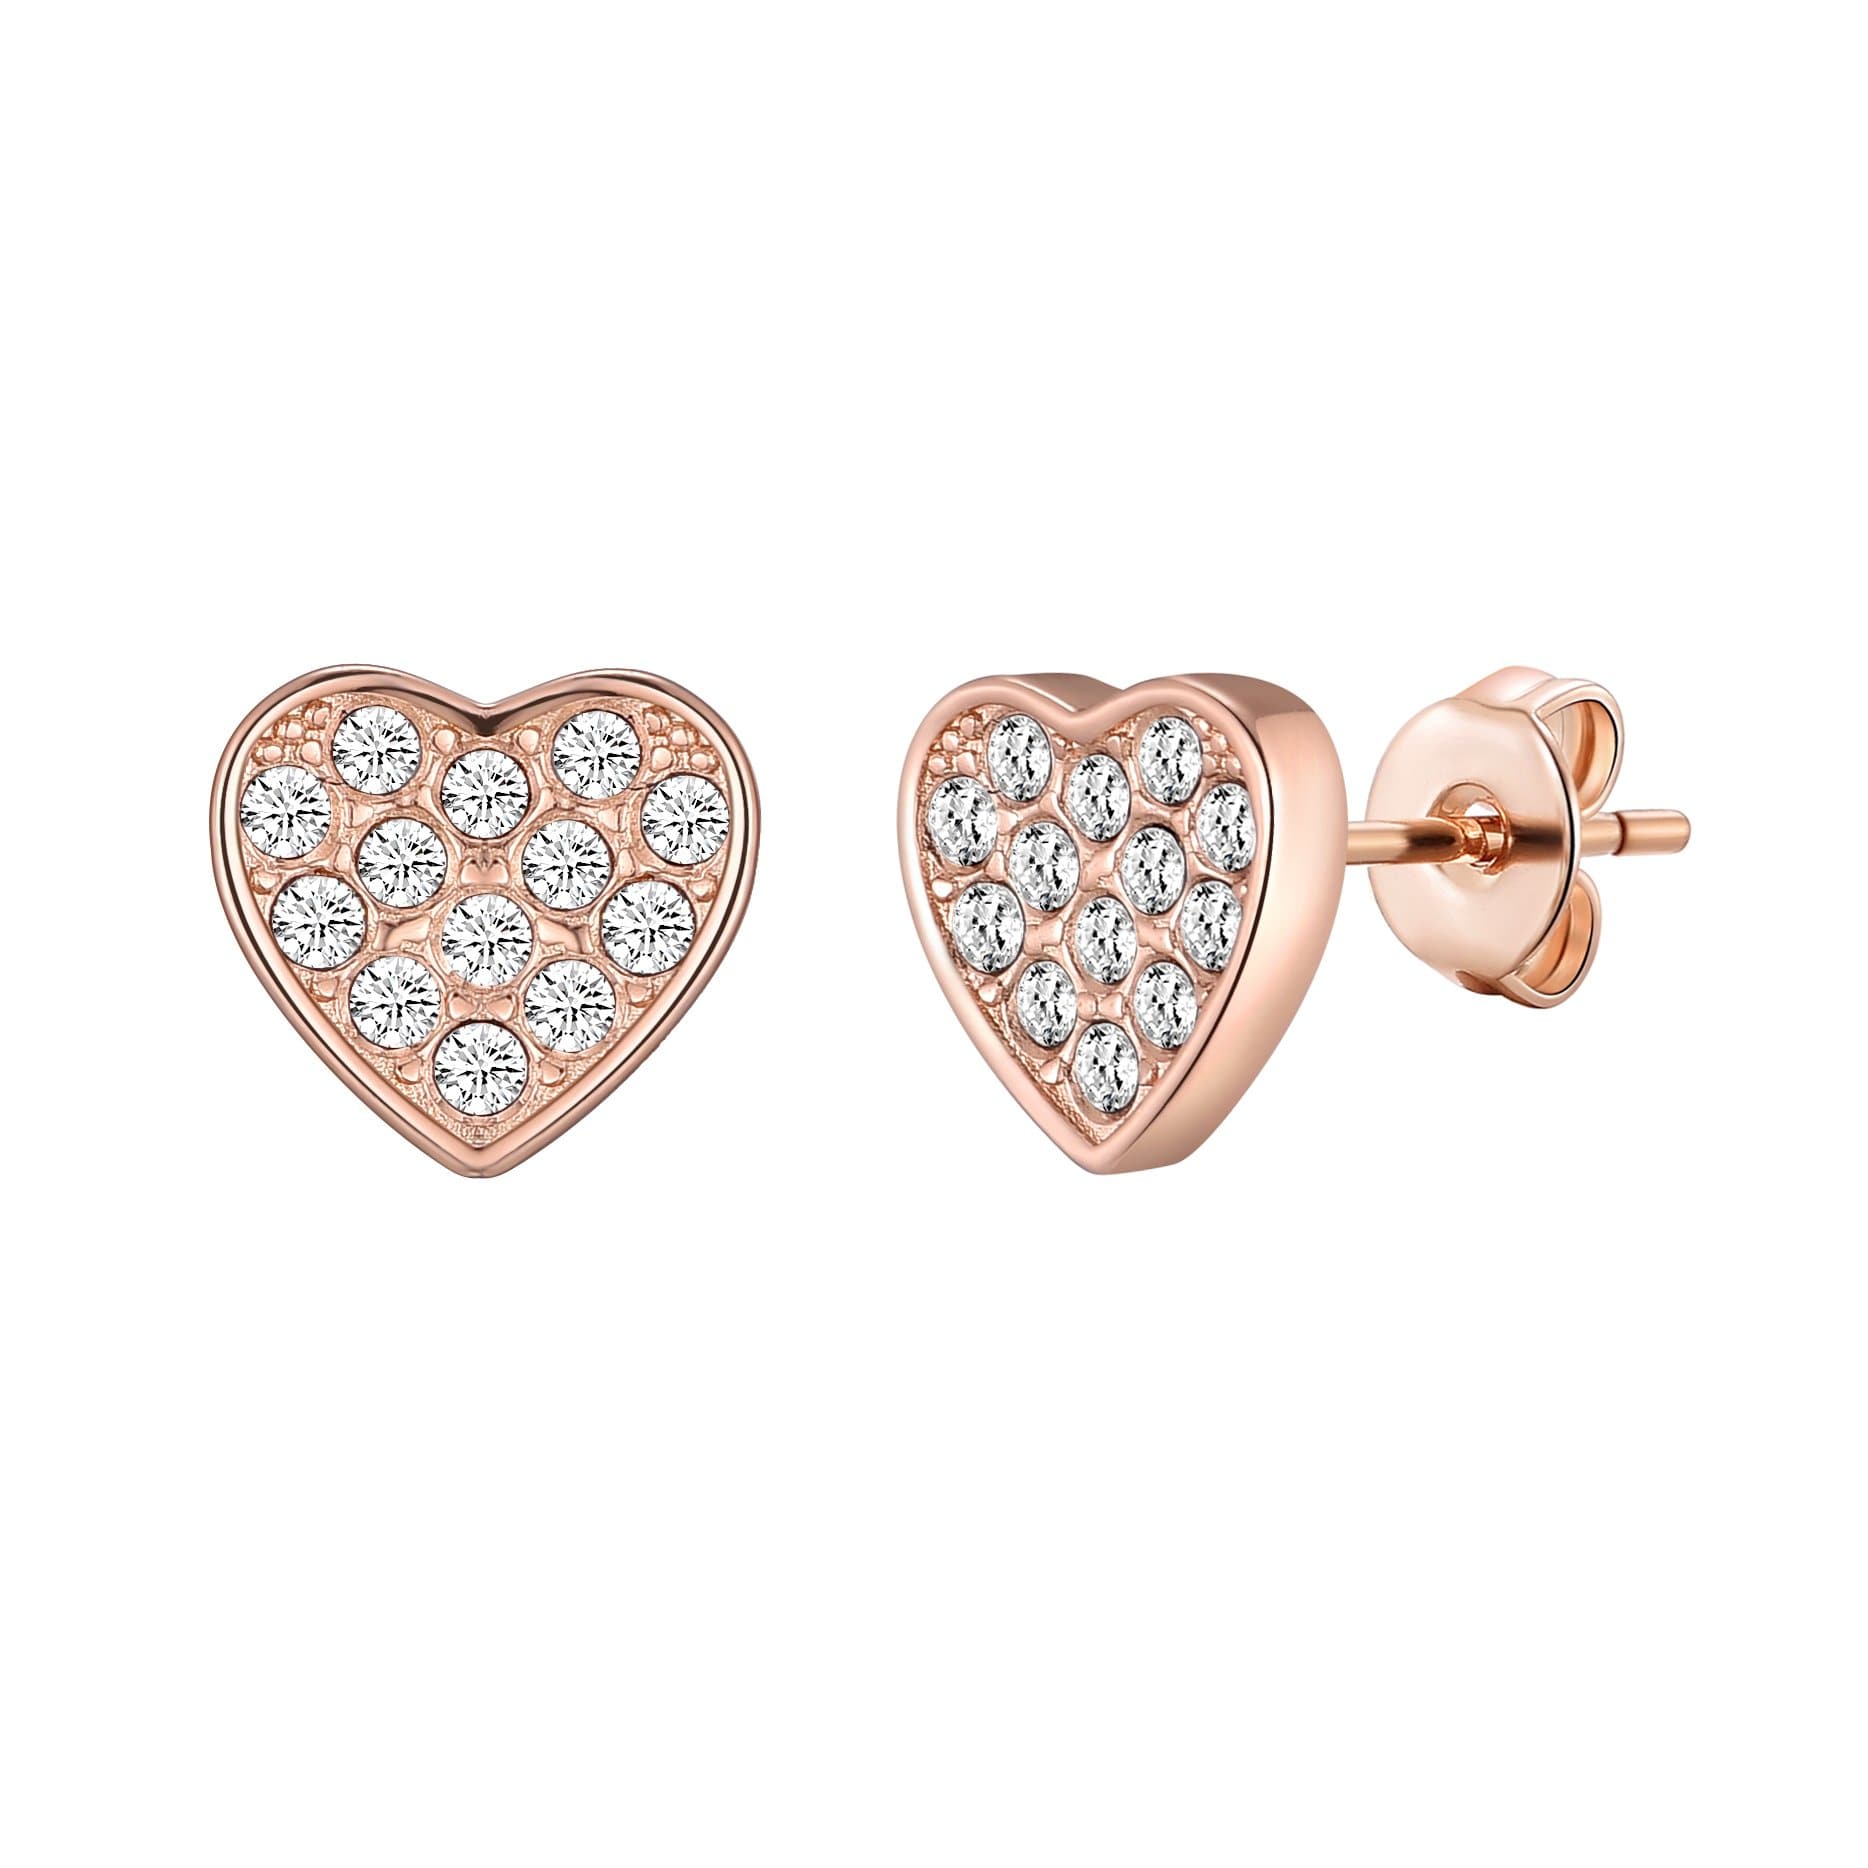 Rose Gold Plated Pave Heart Earrings Created with Zircondia® Crystals by Philip Jones Jewellery